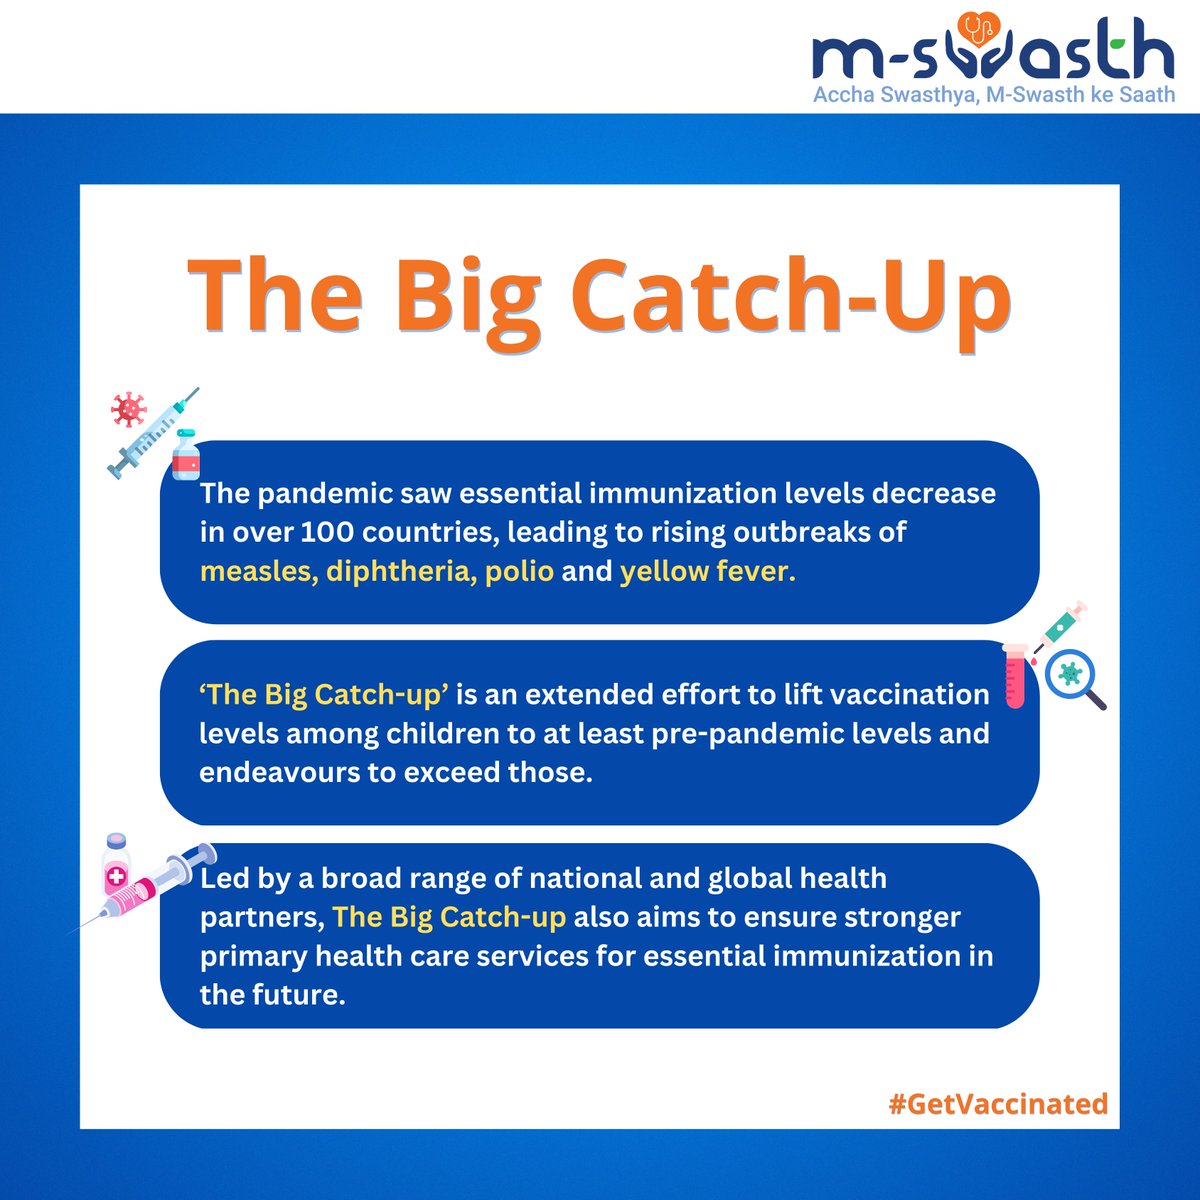 We’re looking forward to a brighter future with the “Big Catch-up” – a concerted global effort to vaccinate millions of children and restore immunization progress lost during the pandemic. #VaccinateNow #BigCatchup #ImmunizationProgress #HealthierWorld